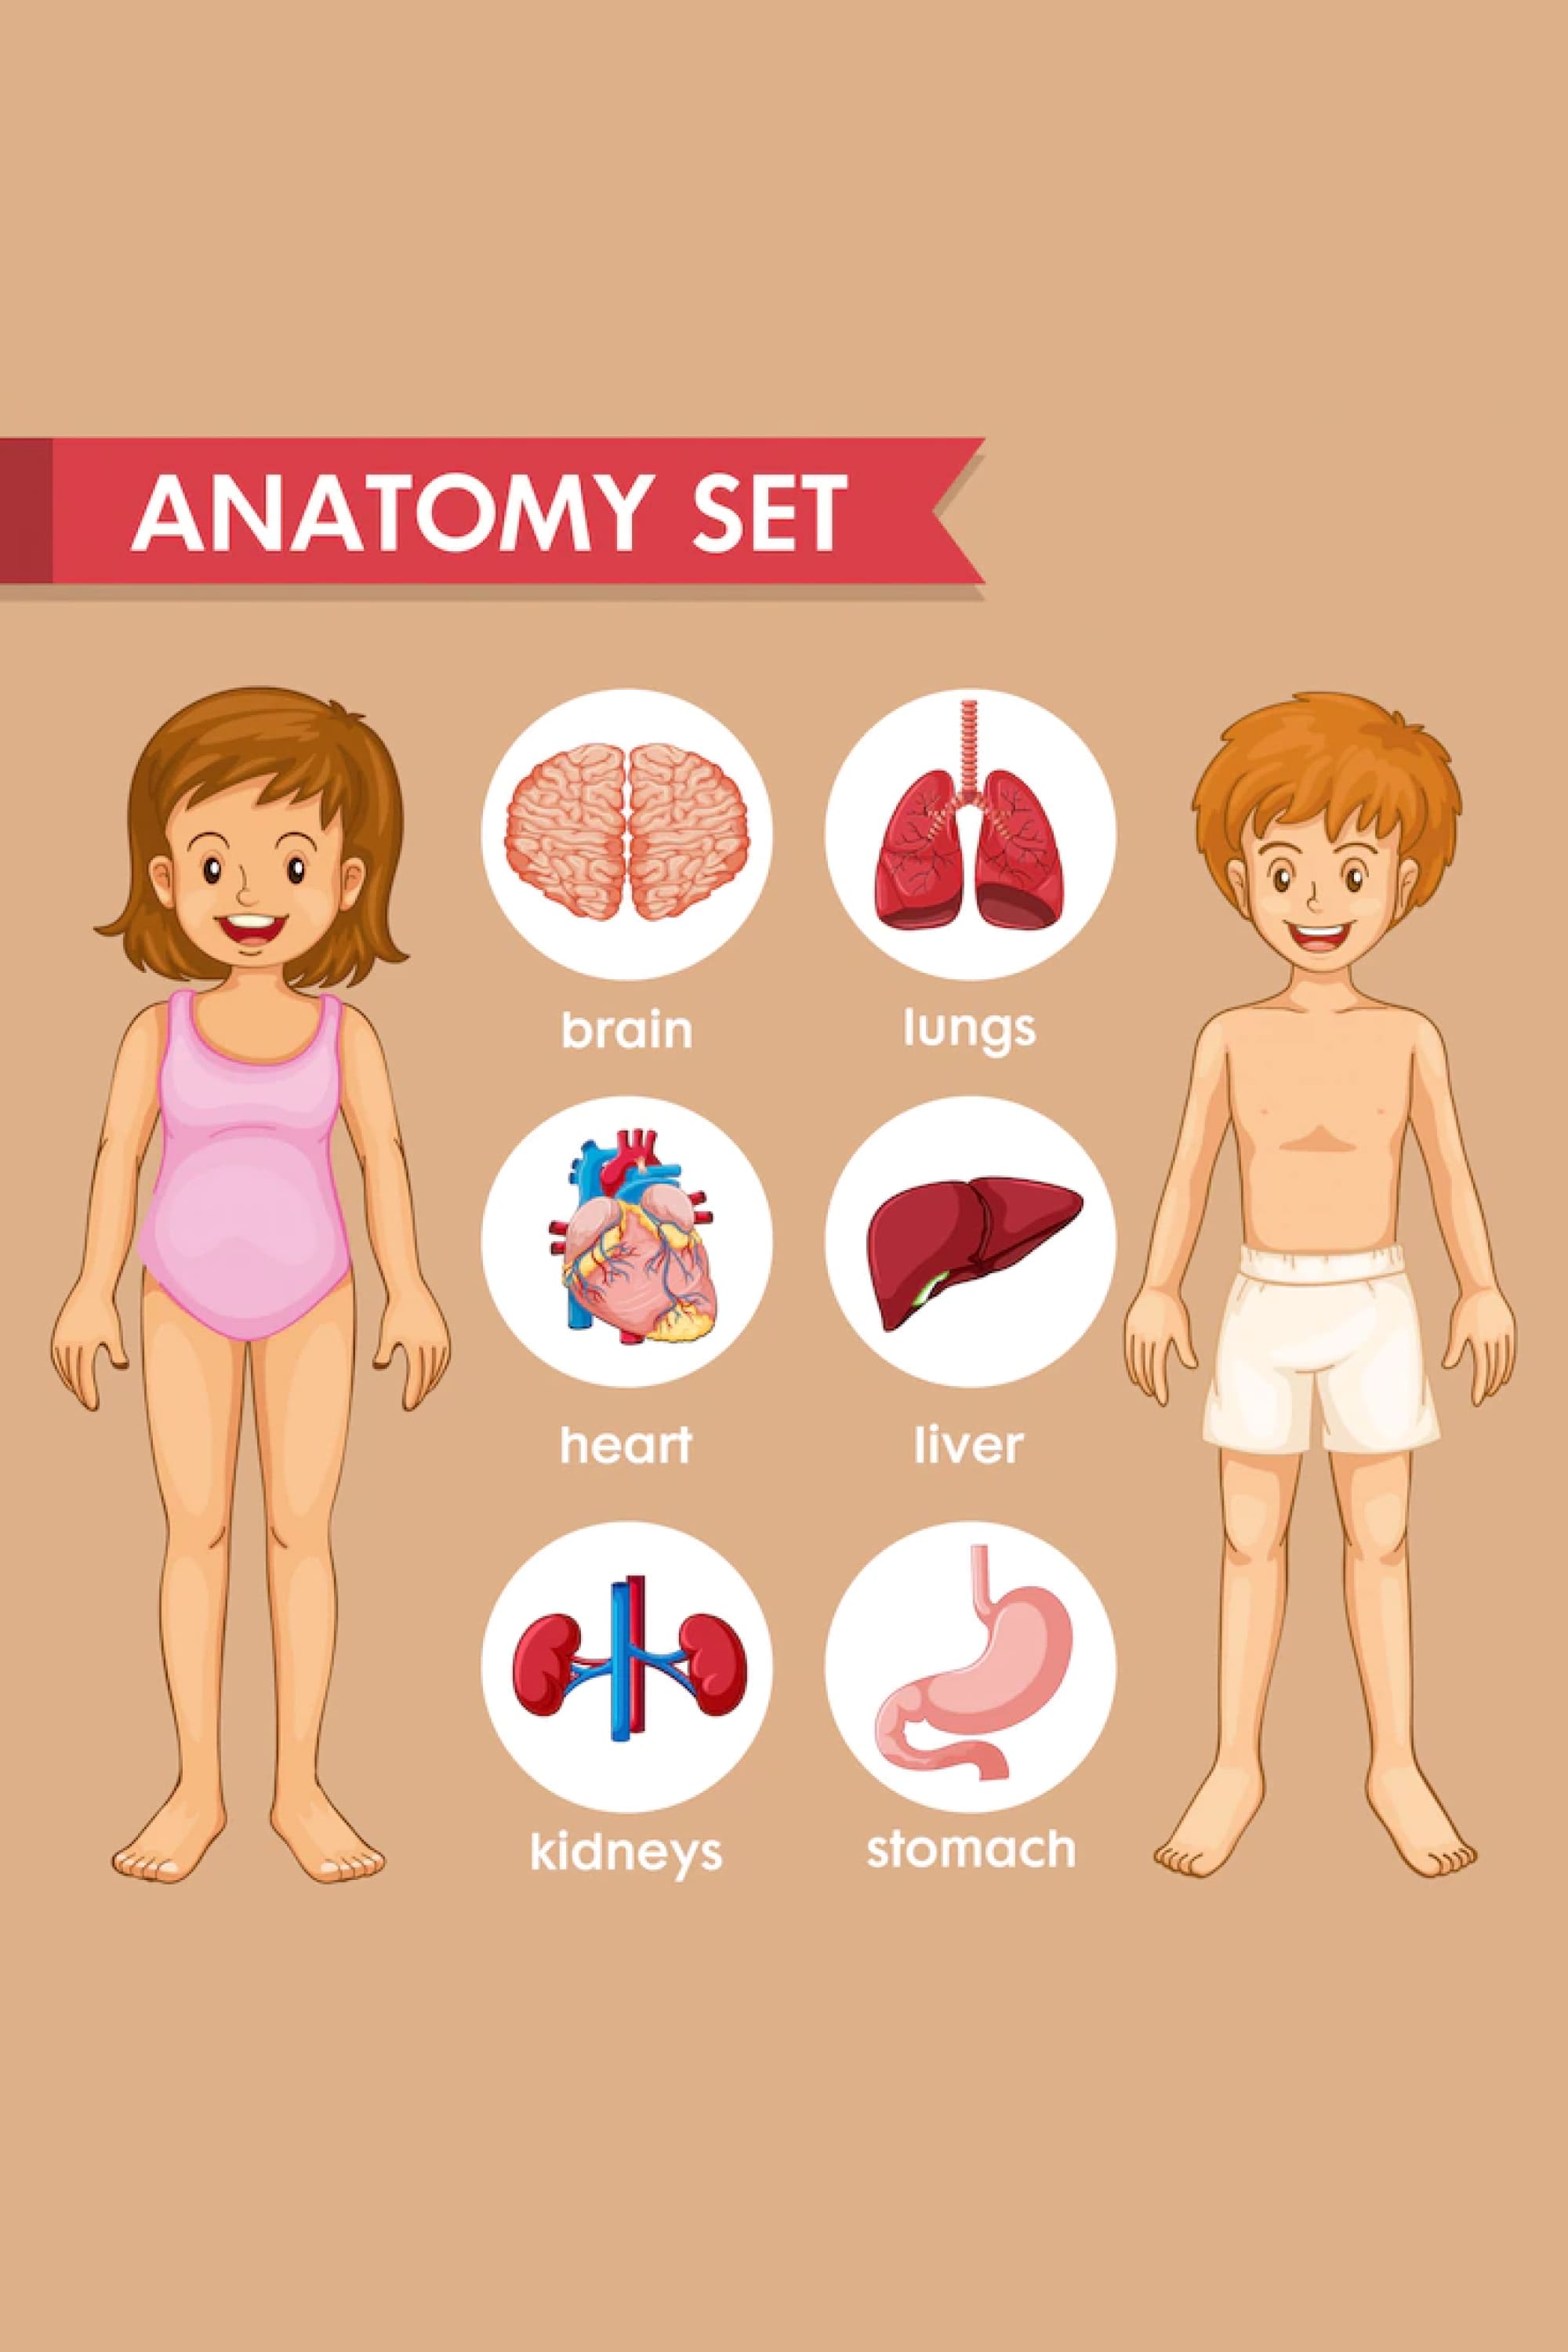 This infographic illustrates human anatomical features.